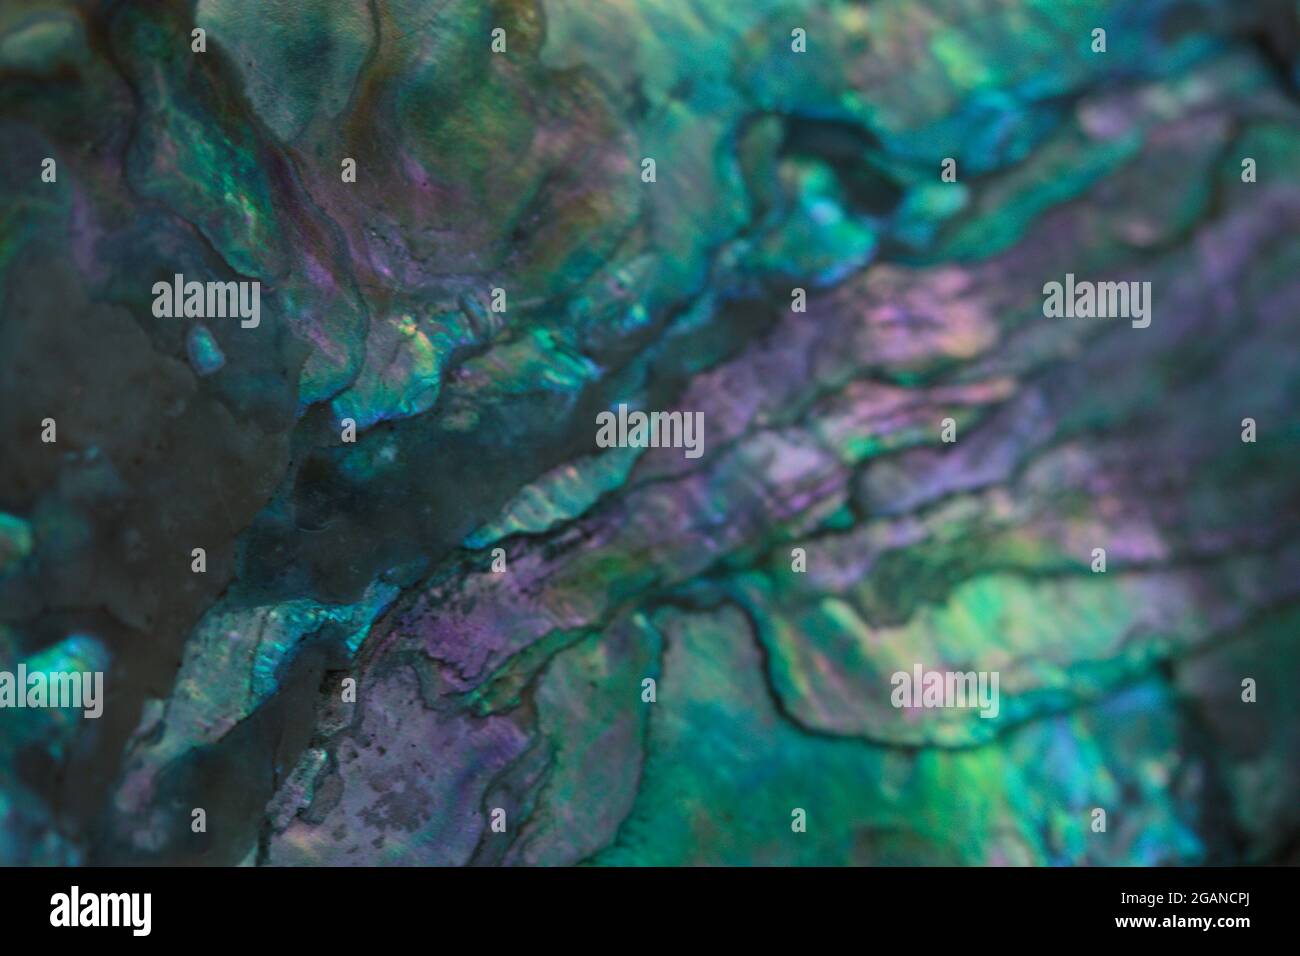 abstract background in iridescent blue, purple and green created from a close up macro photo of mother of pearl shell Stock Photo